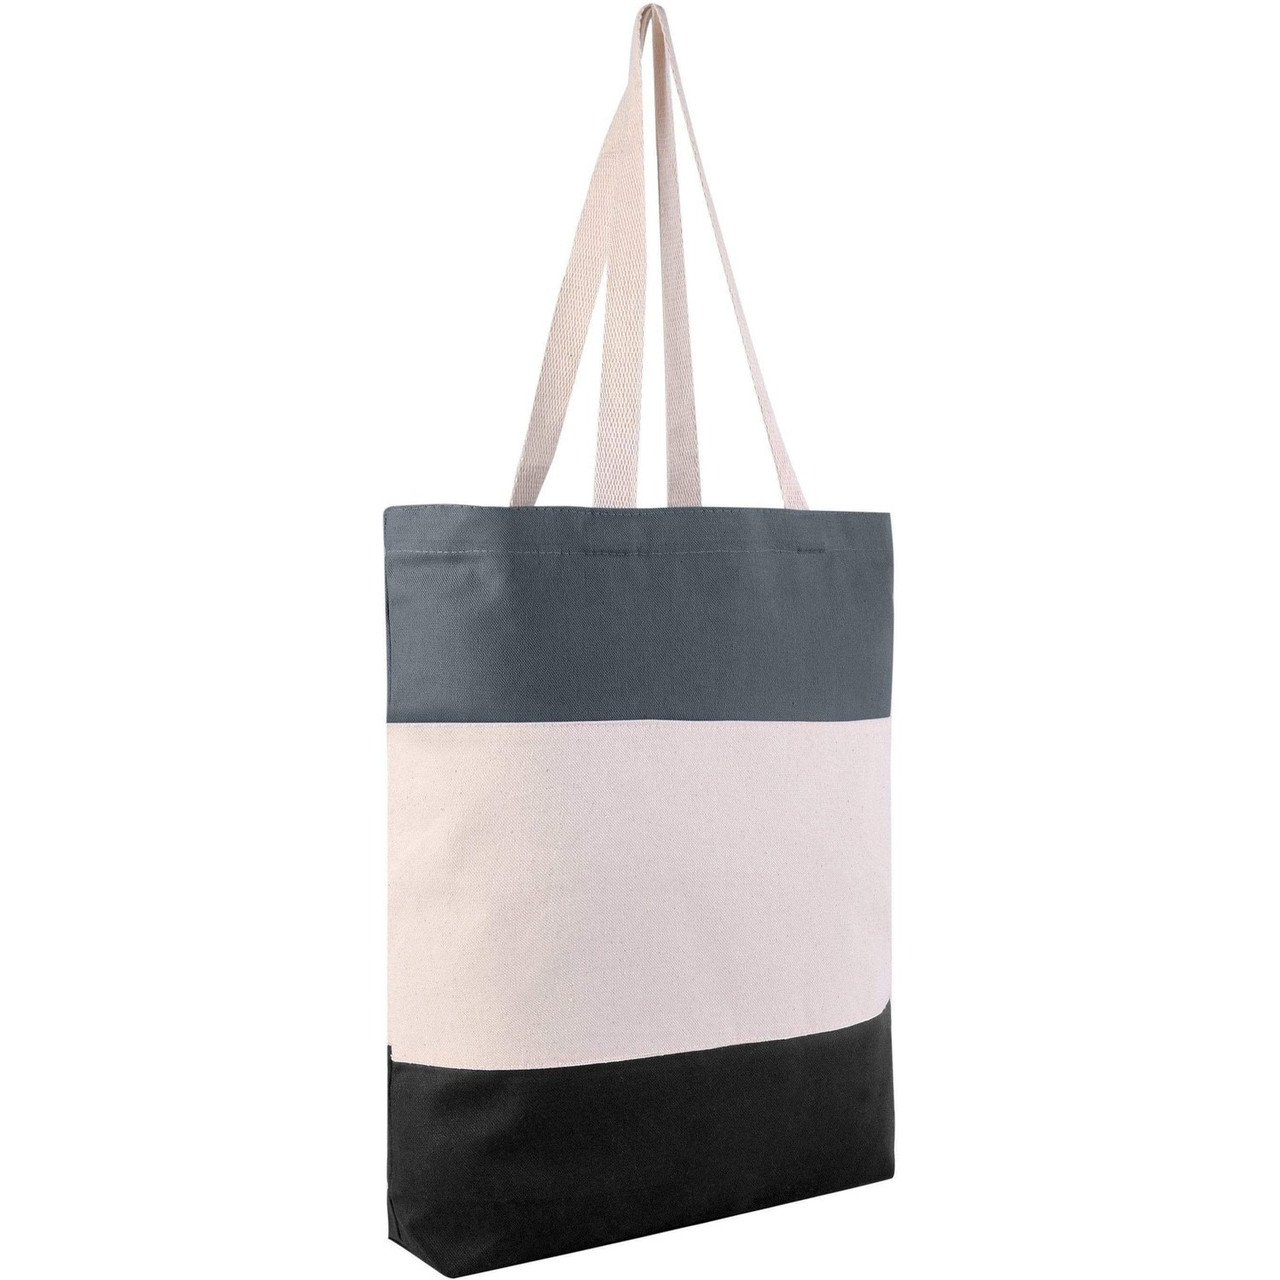 BLANK CANVAS TOTE BAGS FROM BAGZDEPOT - BagzDepot